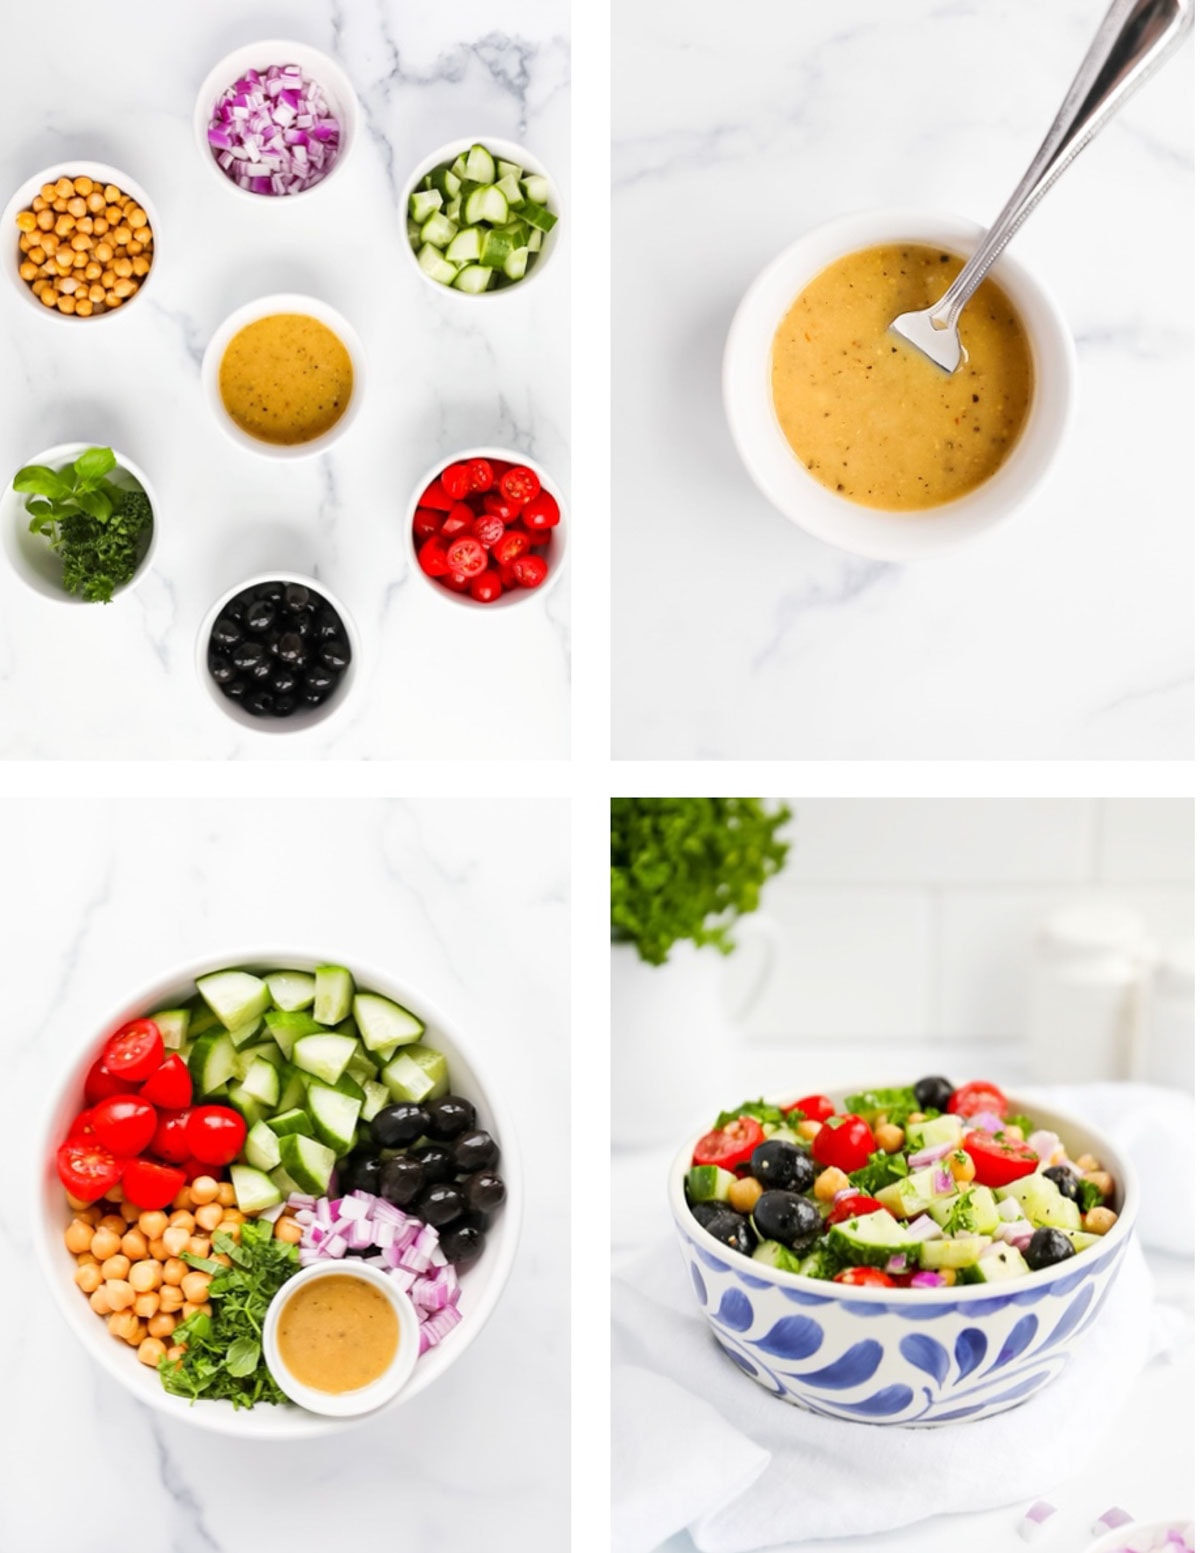 Step by step instructions to make cucumber salad. One picture shows the ingredients in small white bowls, the next shows a homemade salad dressing, then all of the ingredients in a bowl, and the last image is the salad mixed together in a bowl.